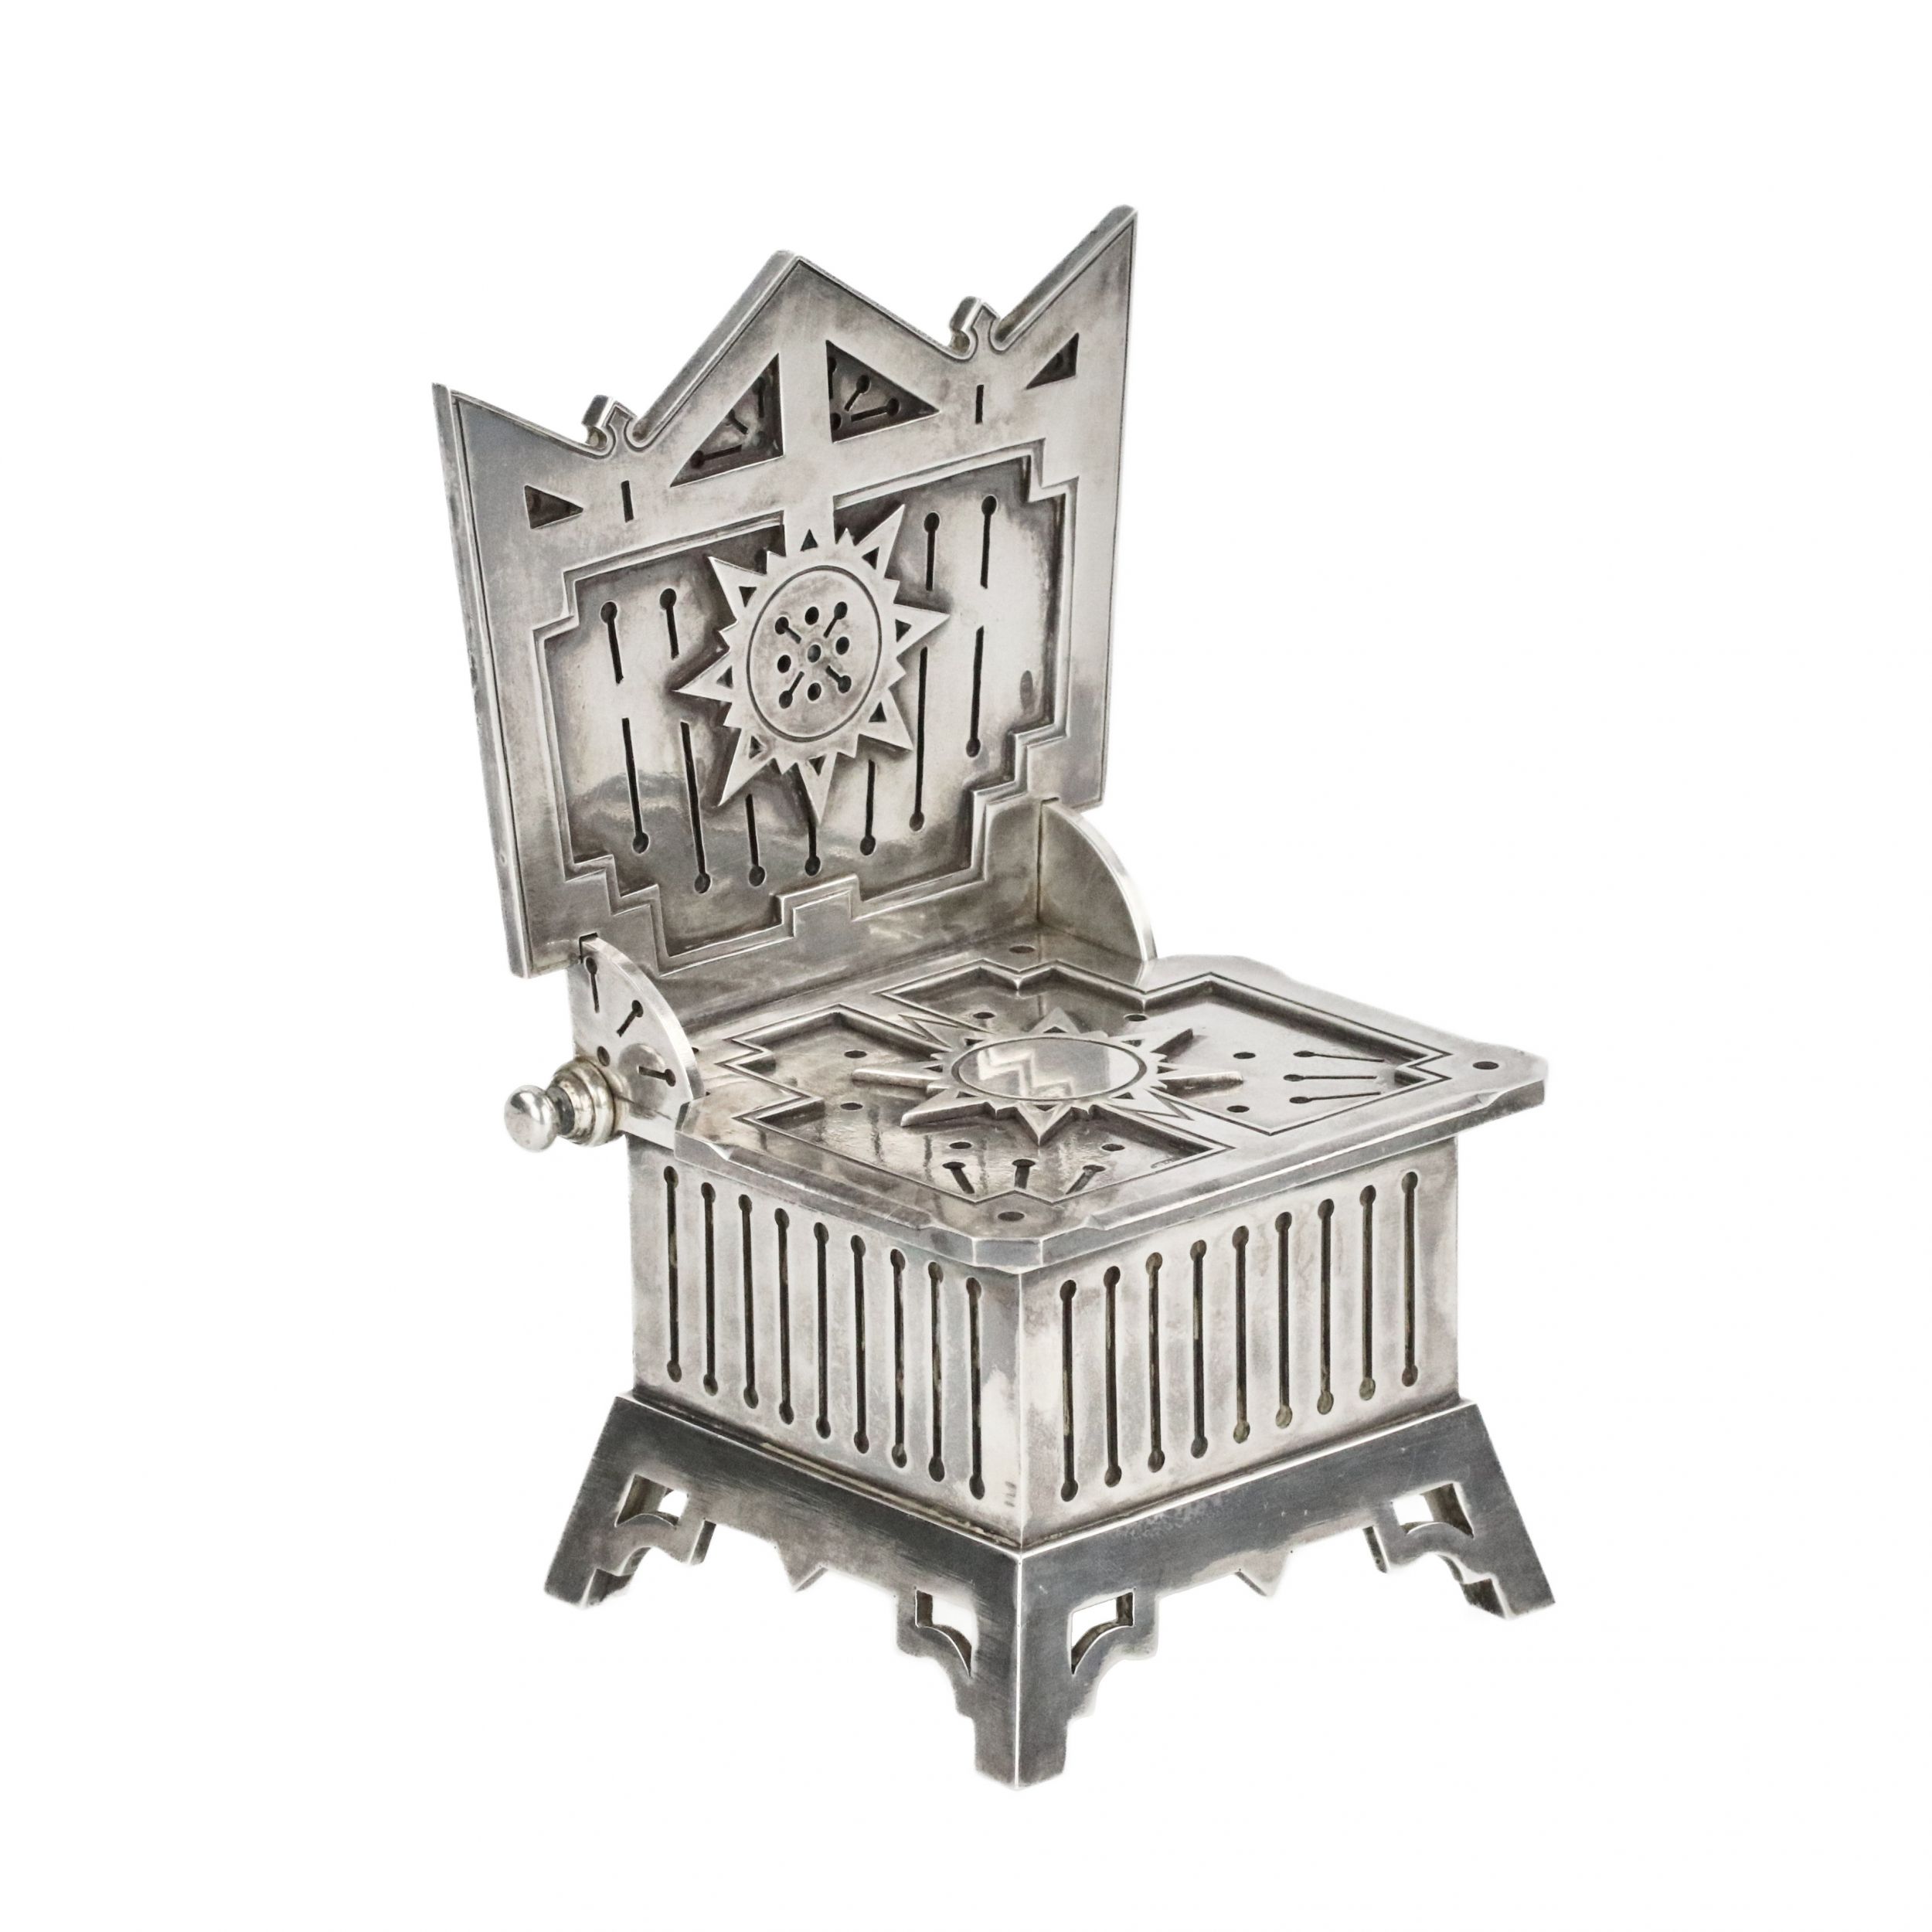 Massive-silver-salt-cellar-throne-with-the-hallmarks-of-the-Grachev-Brothers-and-the-Kostroma-Assay-Office-